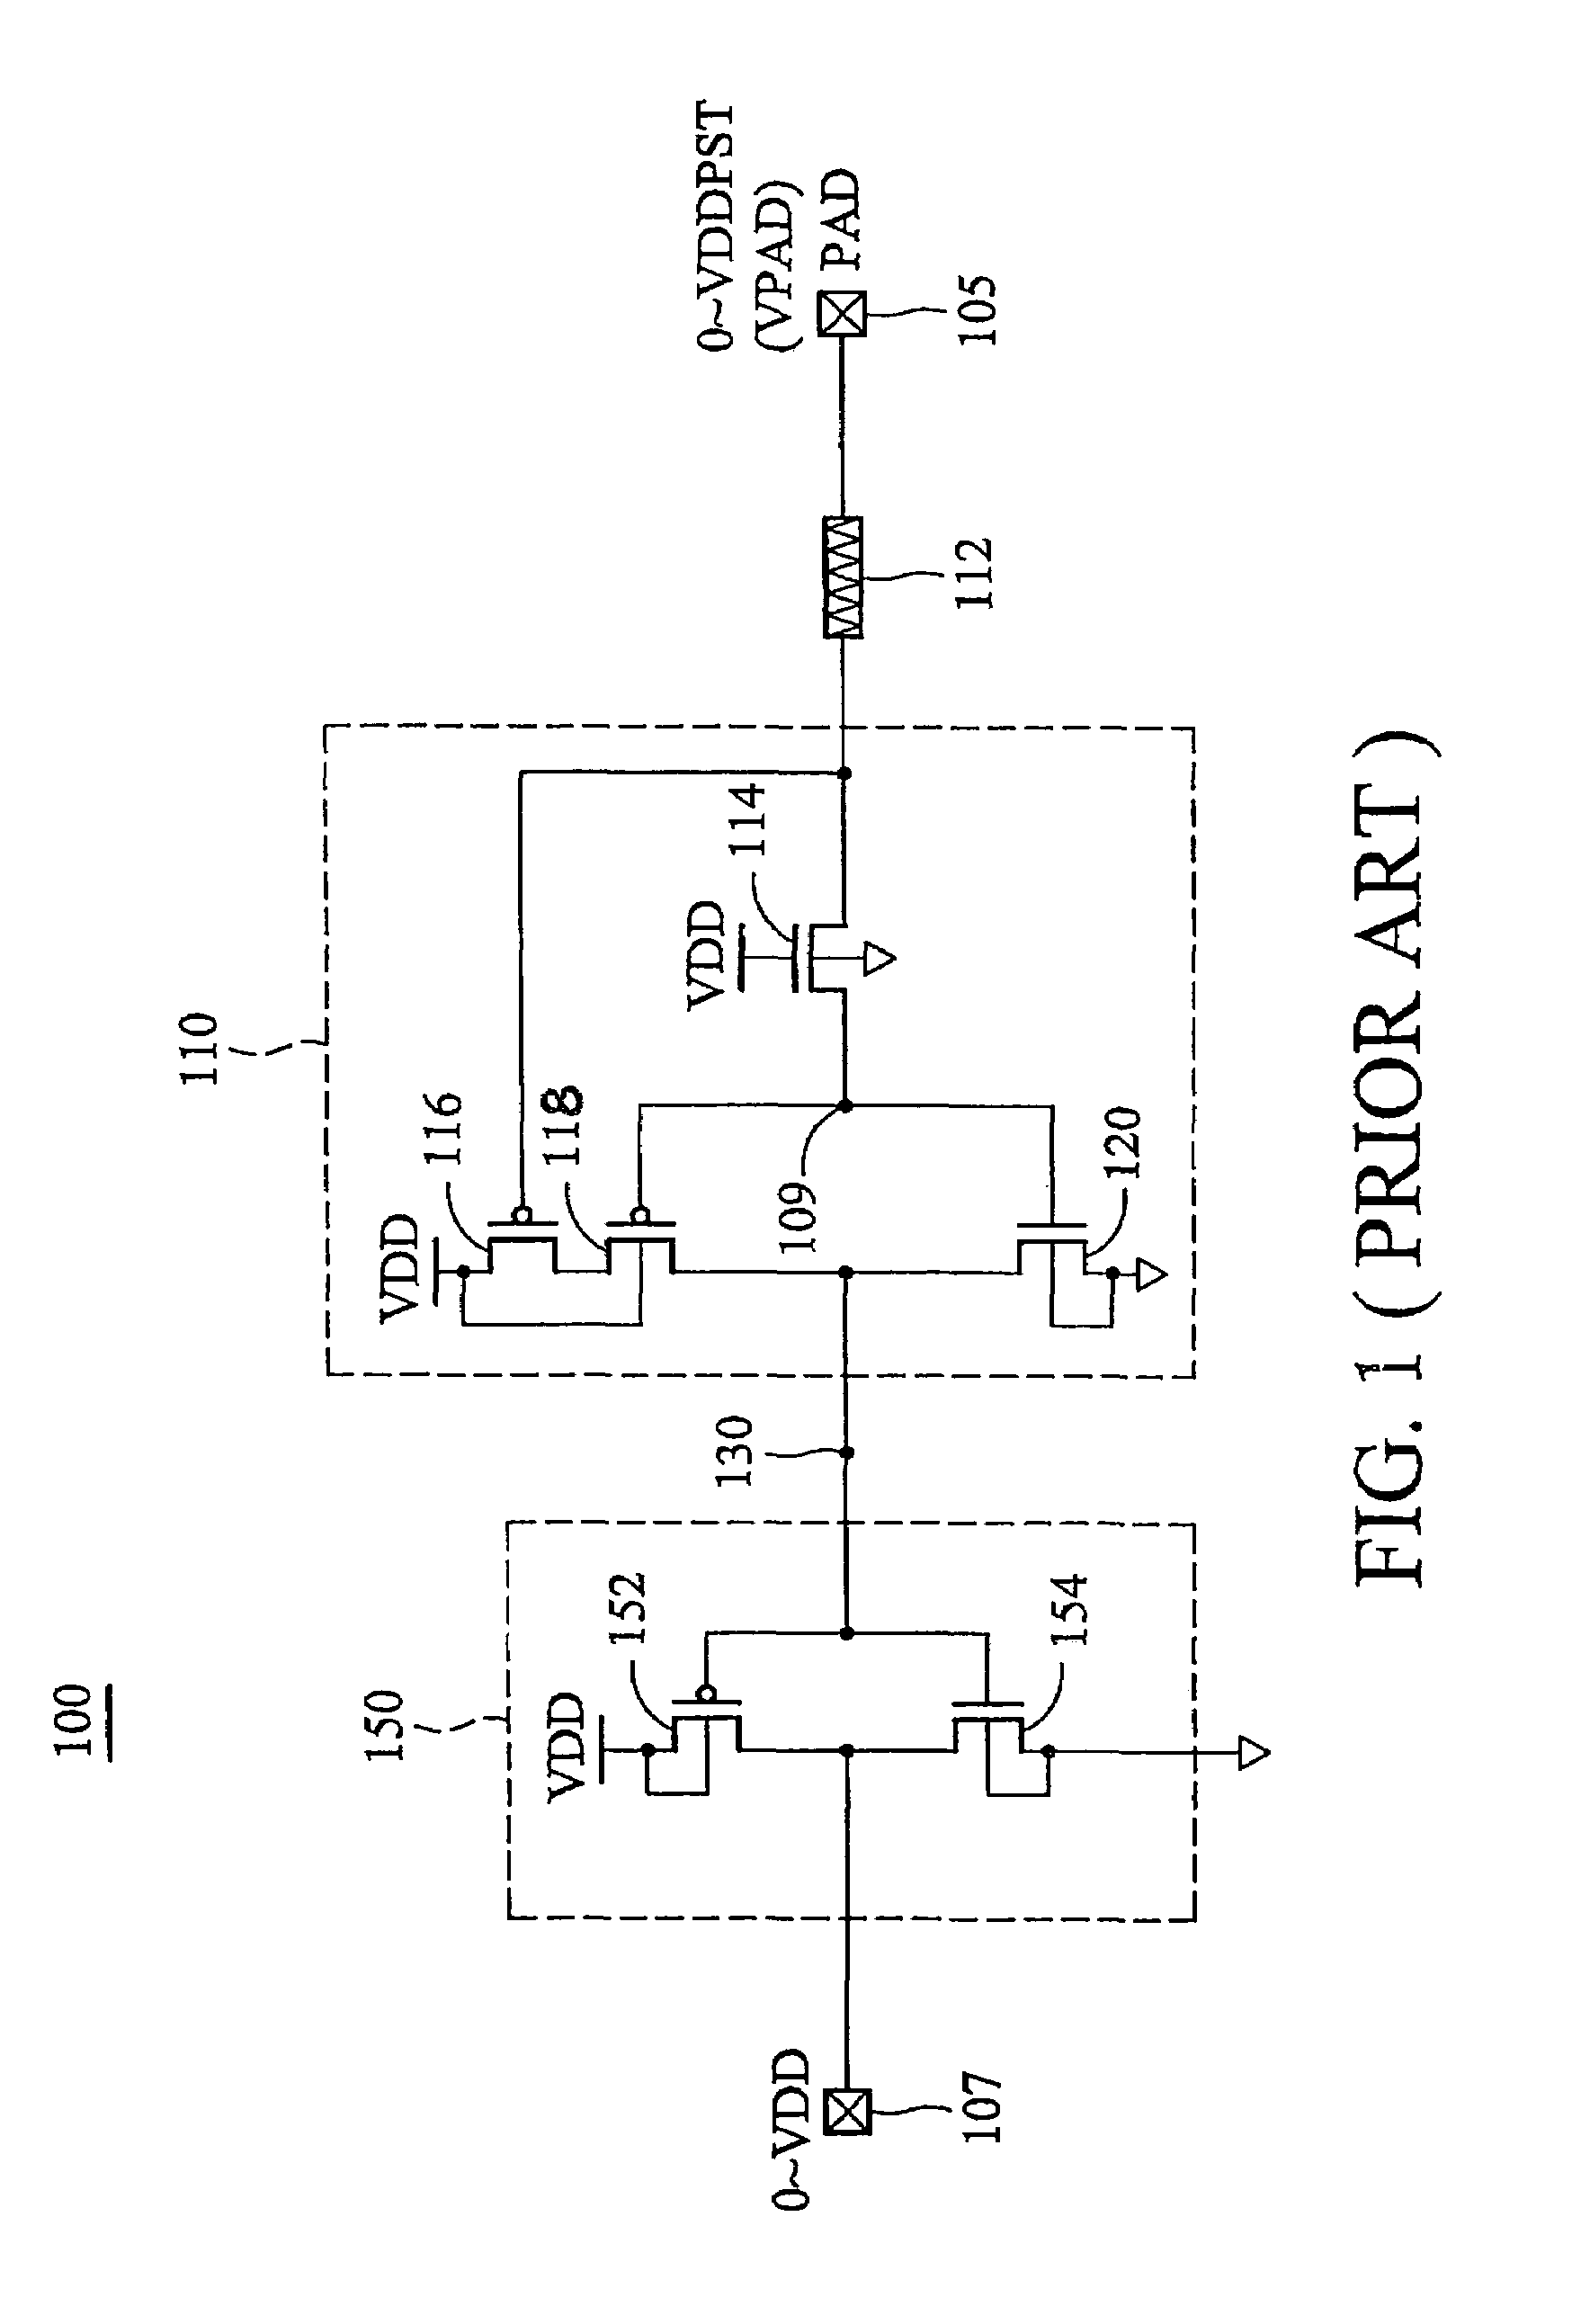 Input buffer structure with single gate oxide